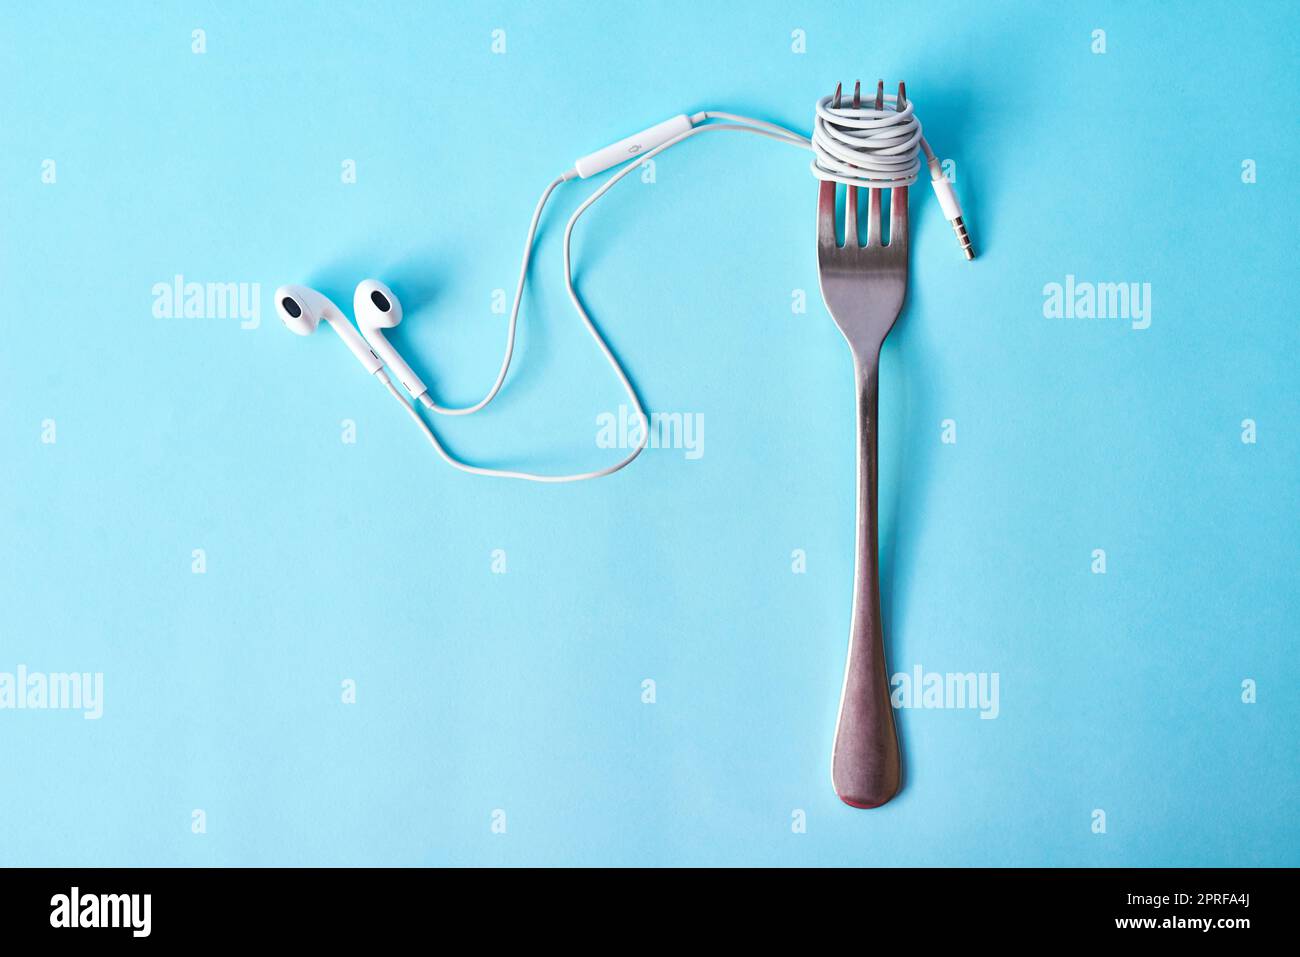 Music is the nourishment of life. Studio shot of earphones wrapped around a fork against a blue background. Stock Photo